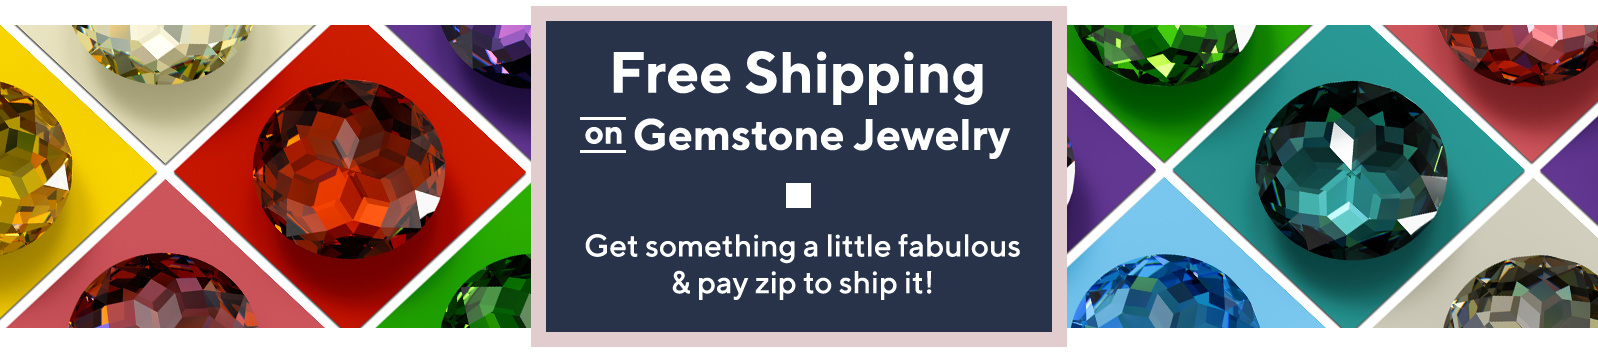 Free Shipping on Gemstone Jewelry - Get something a little fabulous & pay zip to ship it!